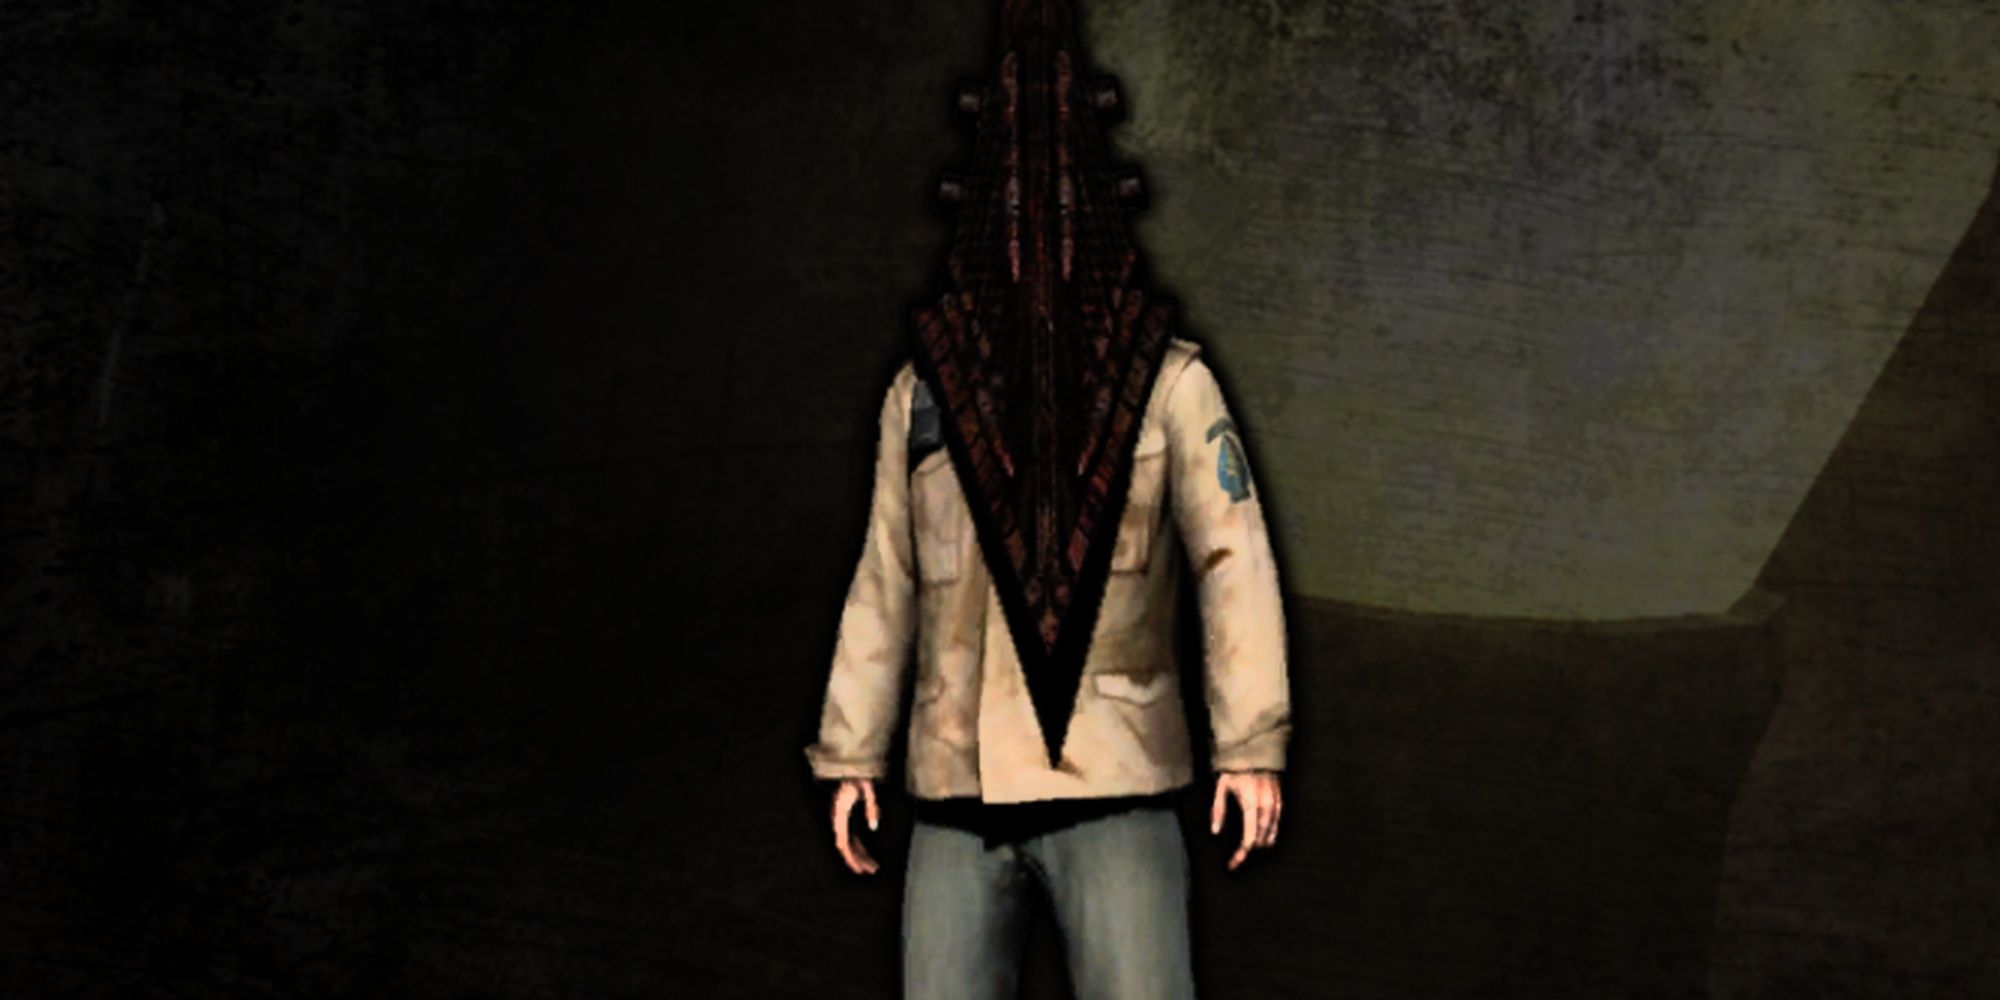 Bogeyman costume from Silent Hill: Homecoming